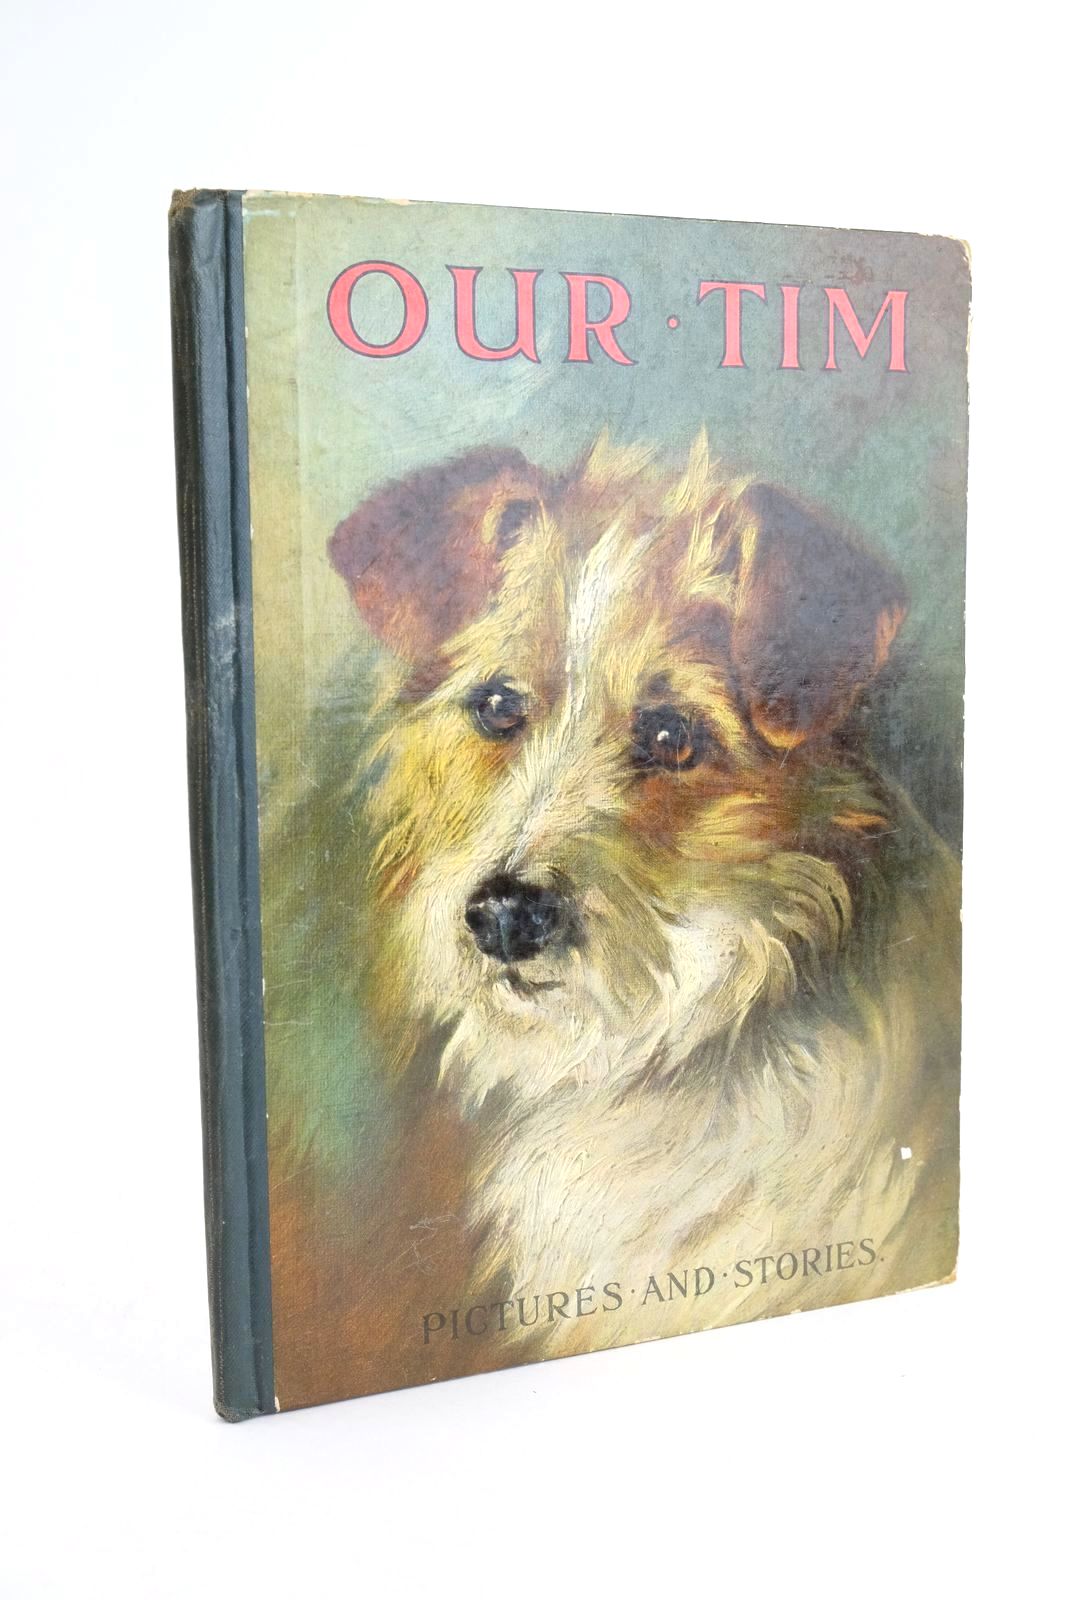 Photo of OUR TIM PICTURES & STORIES written by Carter, Edith E.
Westell, W. Percival
et al, published by Ward, Lock & Co. Ltd. (STOCK CODE: 1323683)  for sale by Stella & Rose's Books